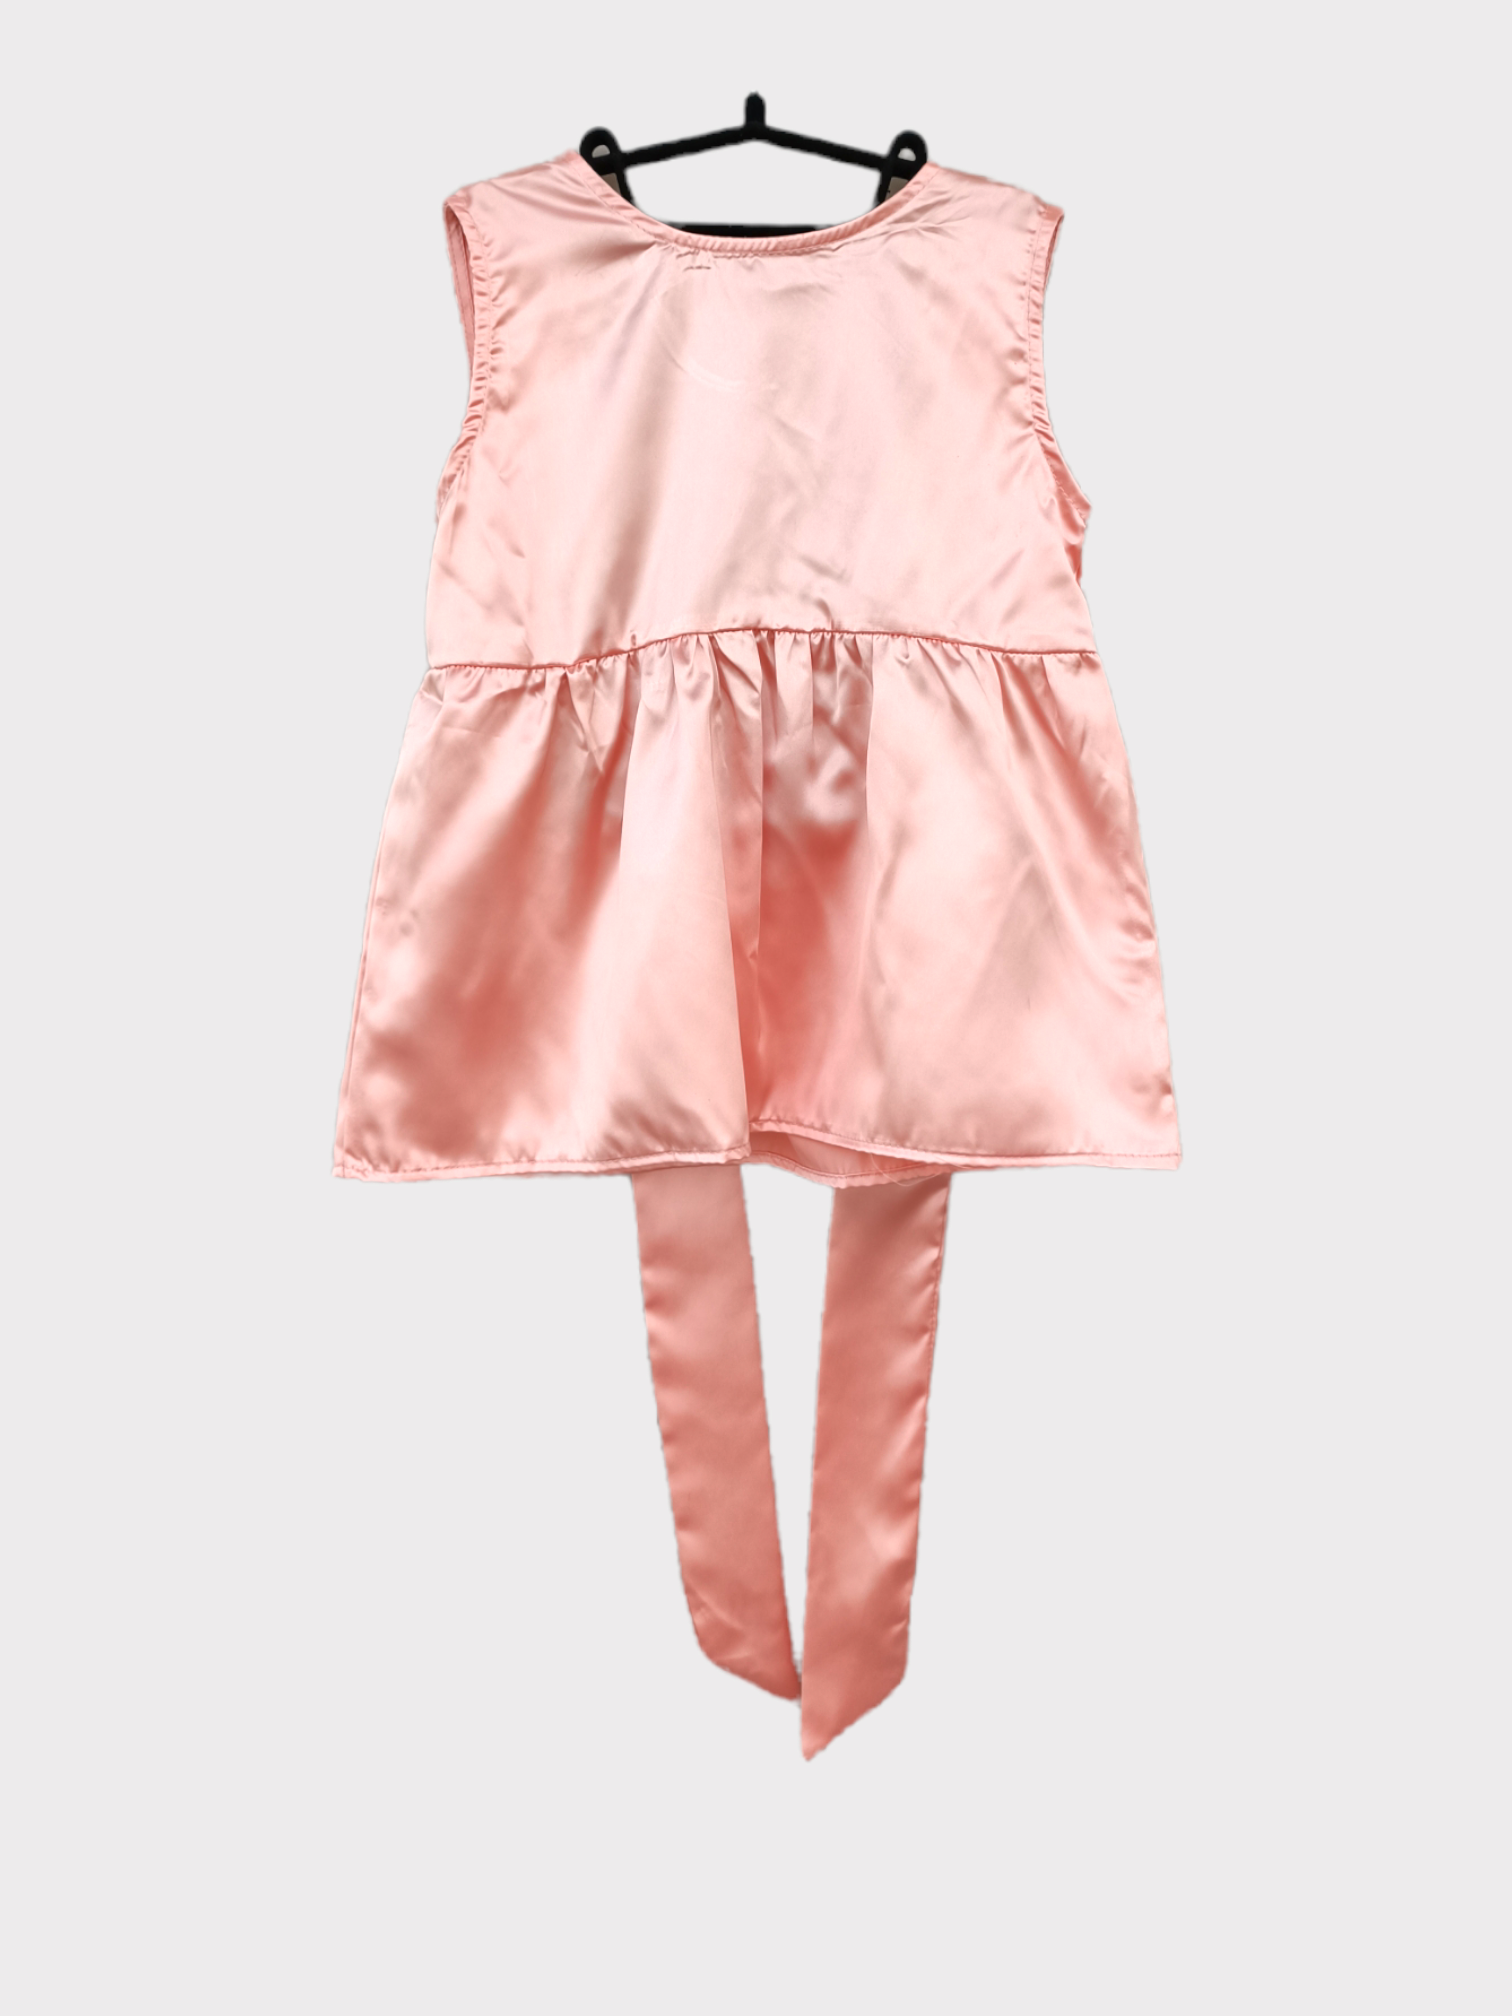 BREAKOUT PEACH STAIN TOP FROCK